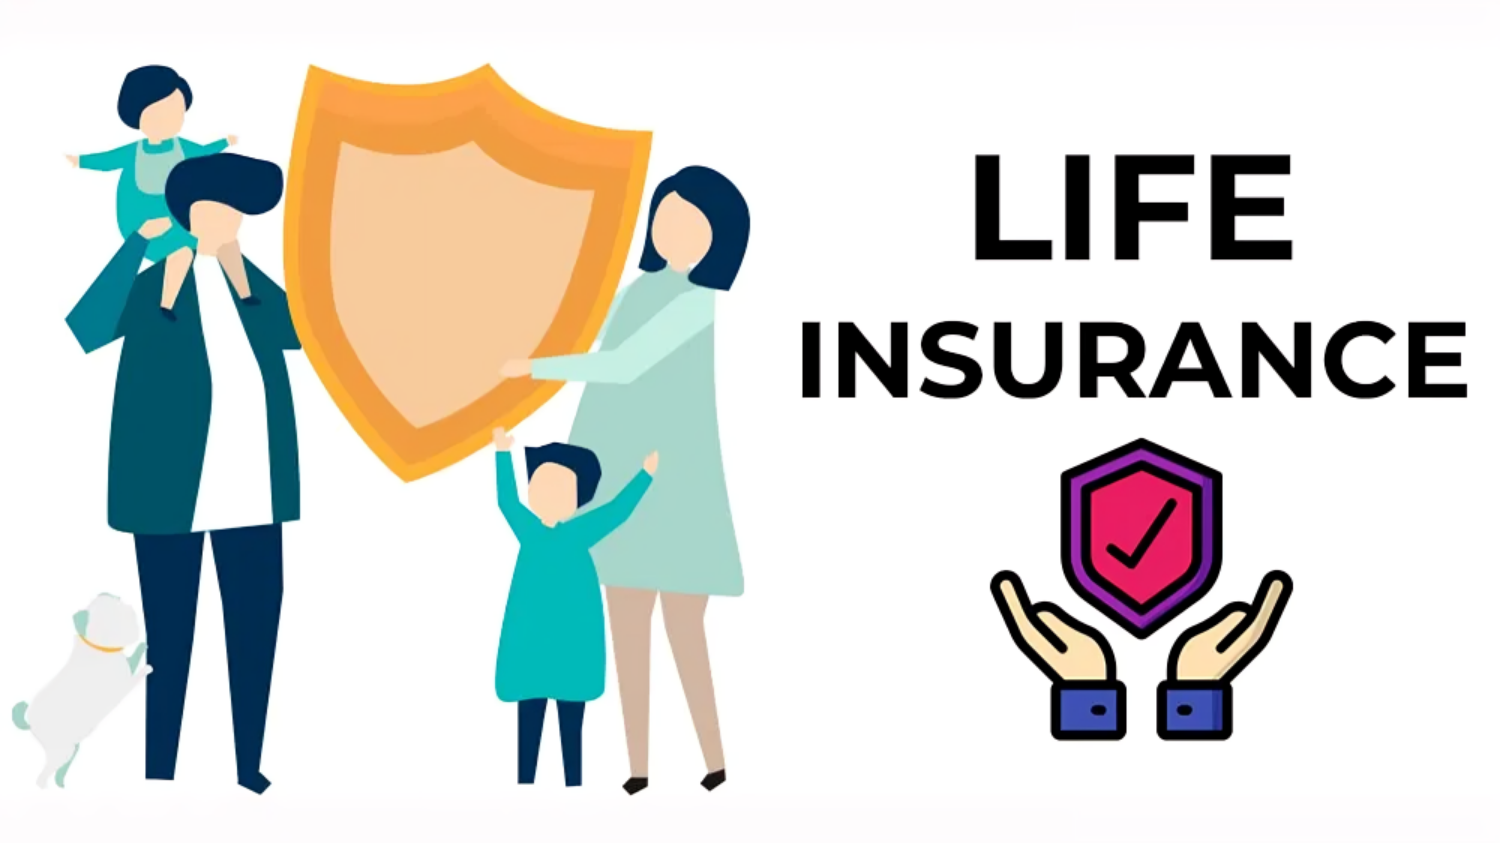 If you have not bought a life insurance policy, know the benefits, you will also get relief in income tax की तस्वीर